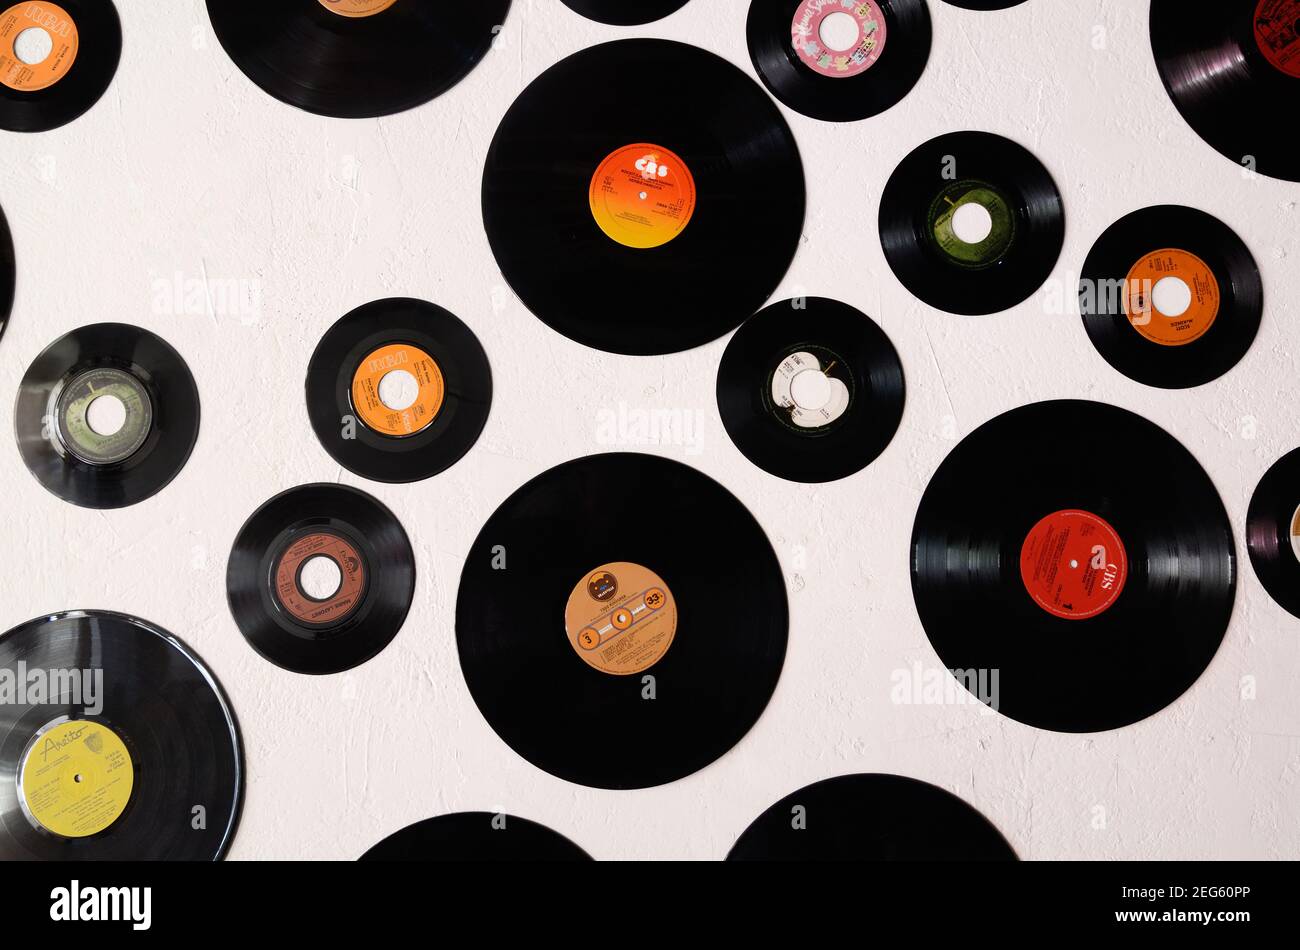 Long Playing Records High Resolution Stock Photography and Images - Alamy